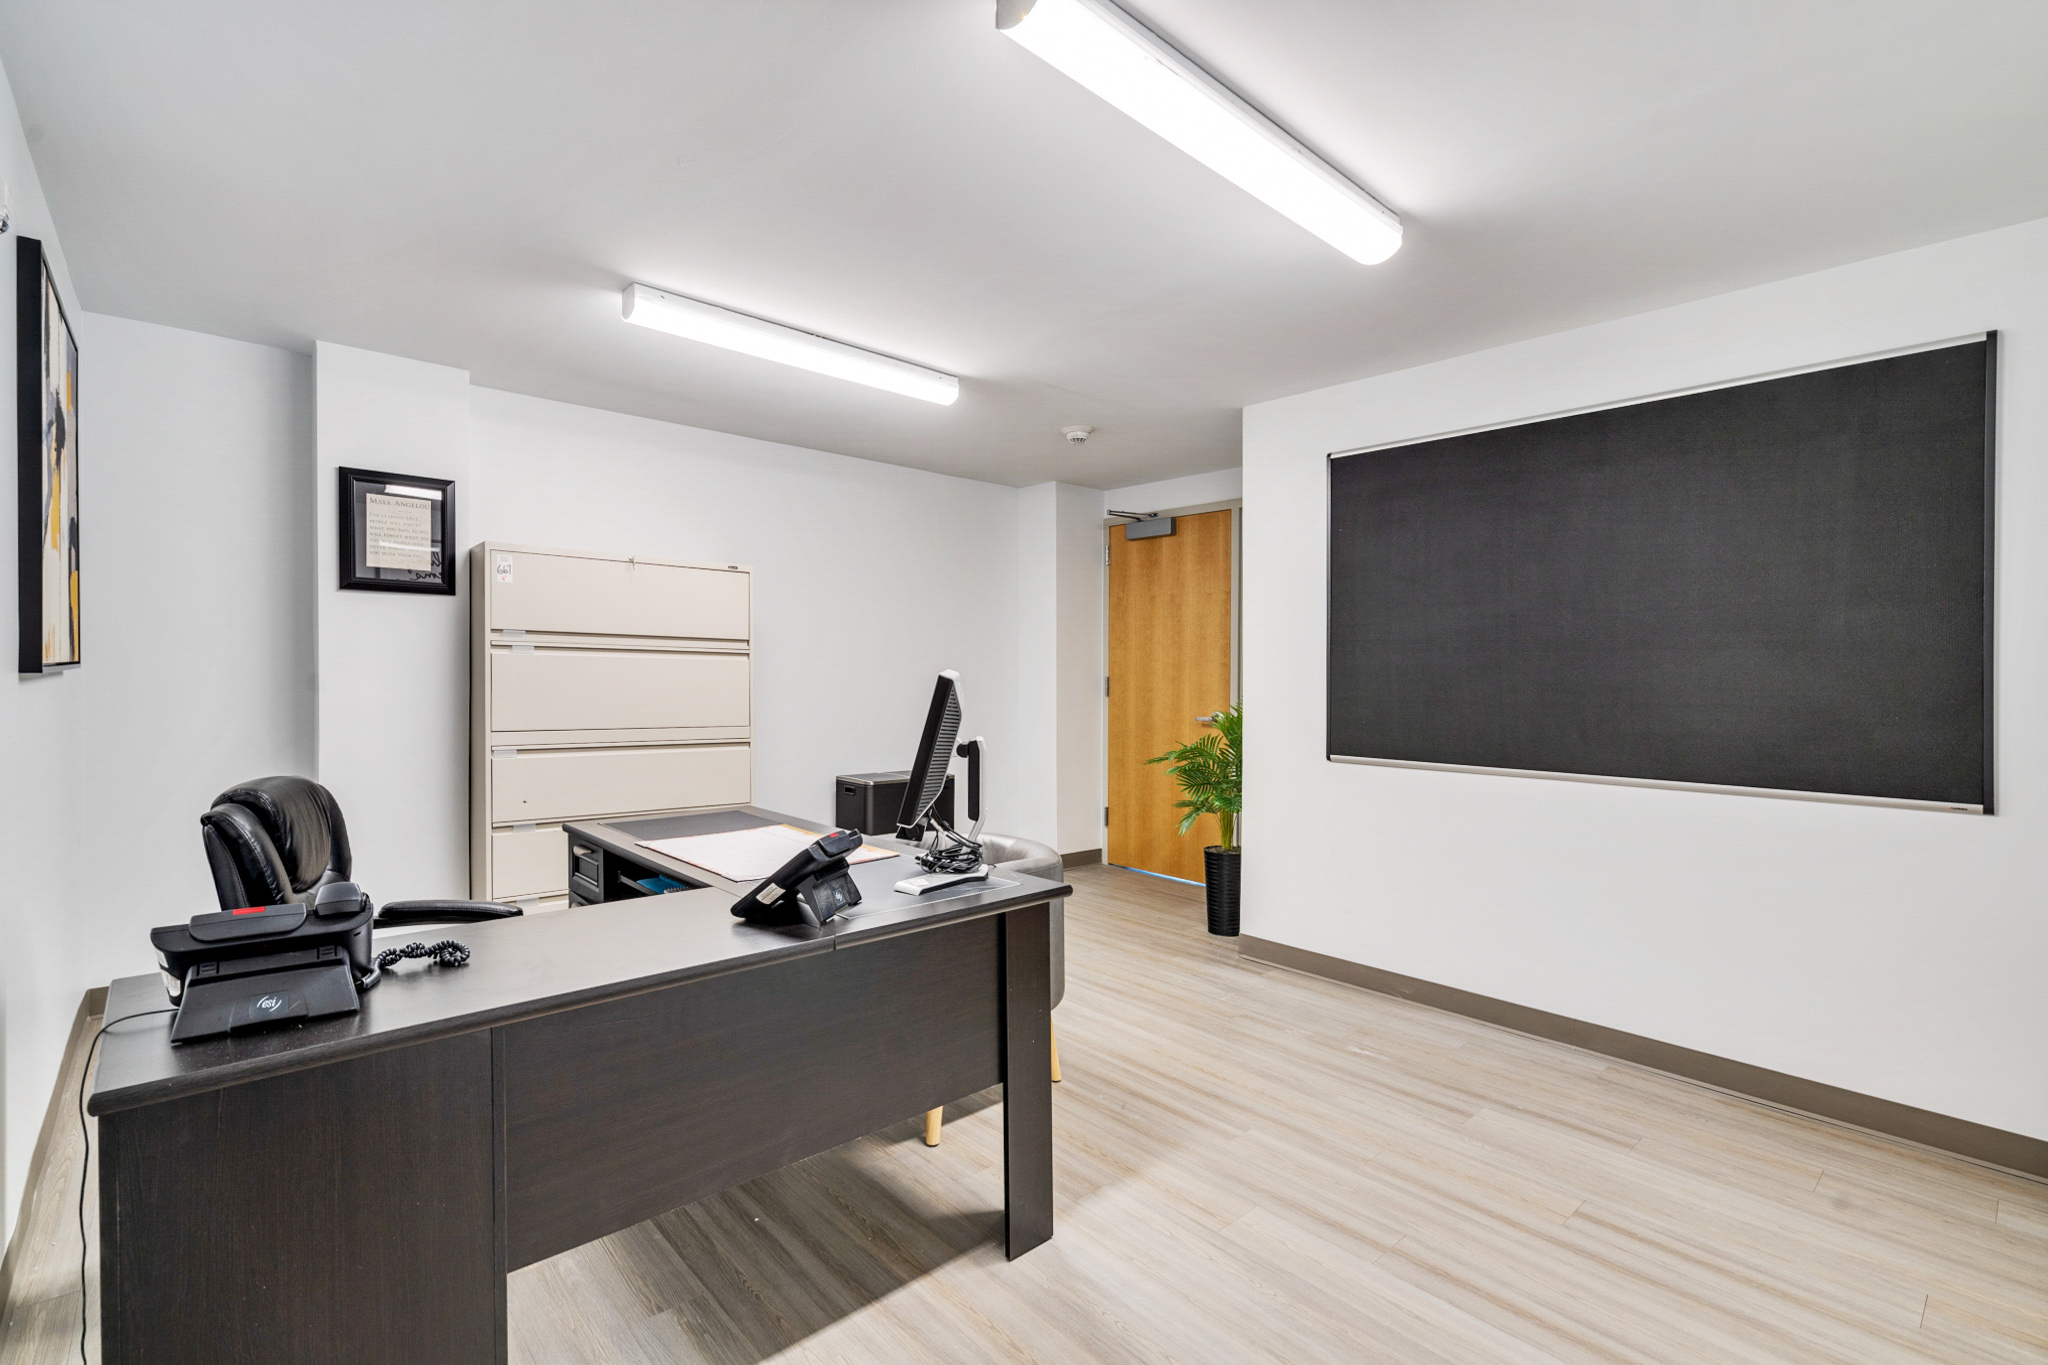 File space. Clean, inviting office. Bright lighting. 